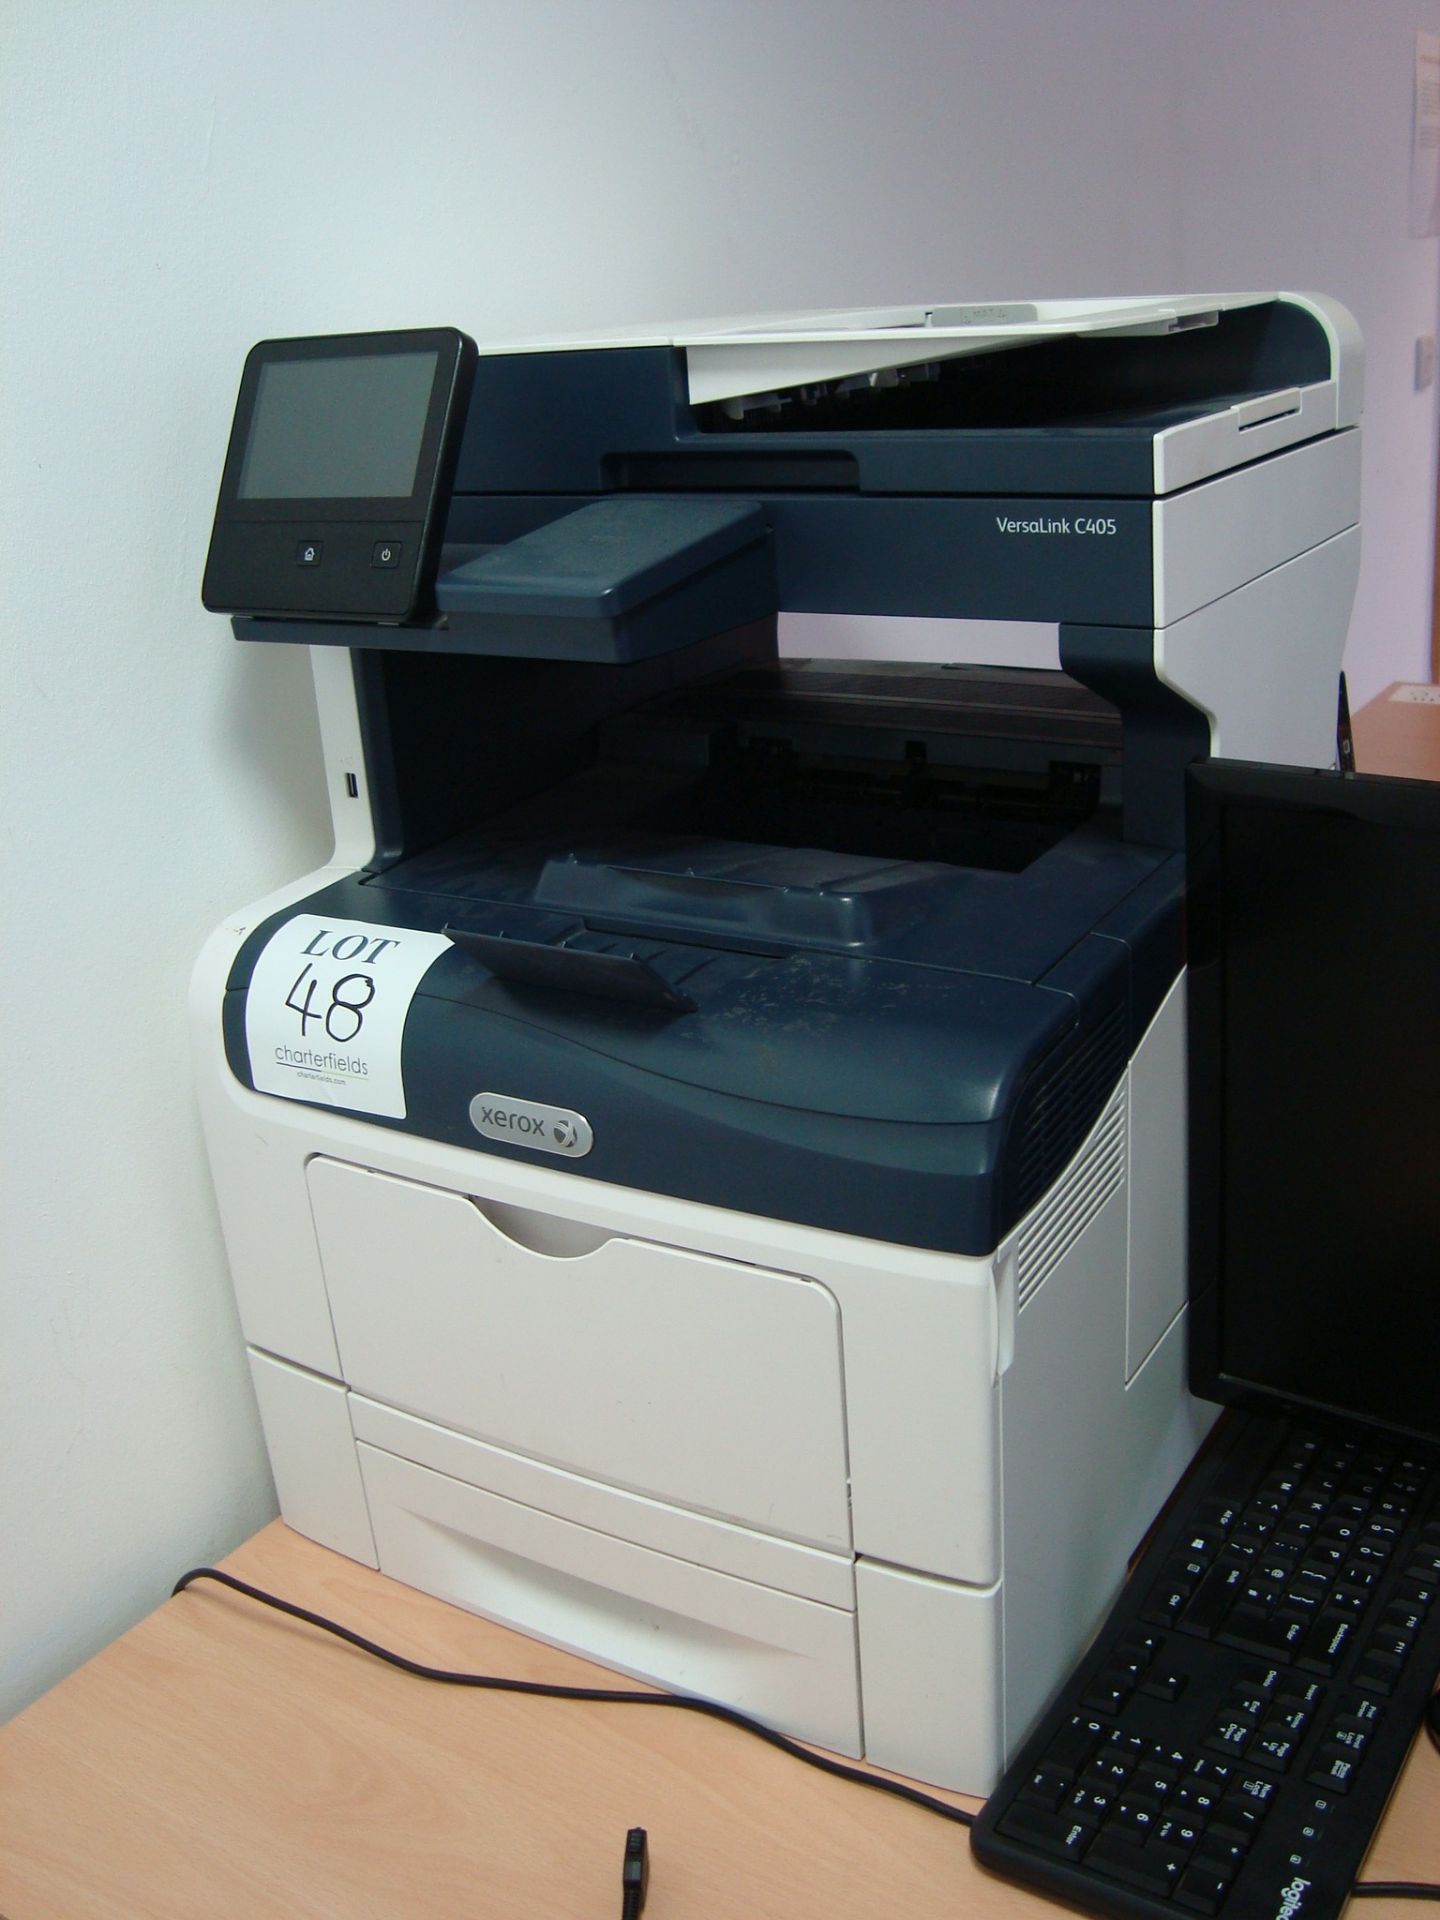 The office electronic equipment including Xerox Versalink C405 multi-function printer, Brewman - Image 4 of 5